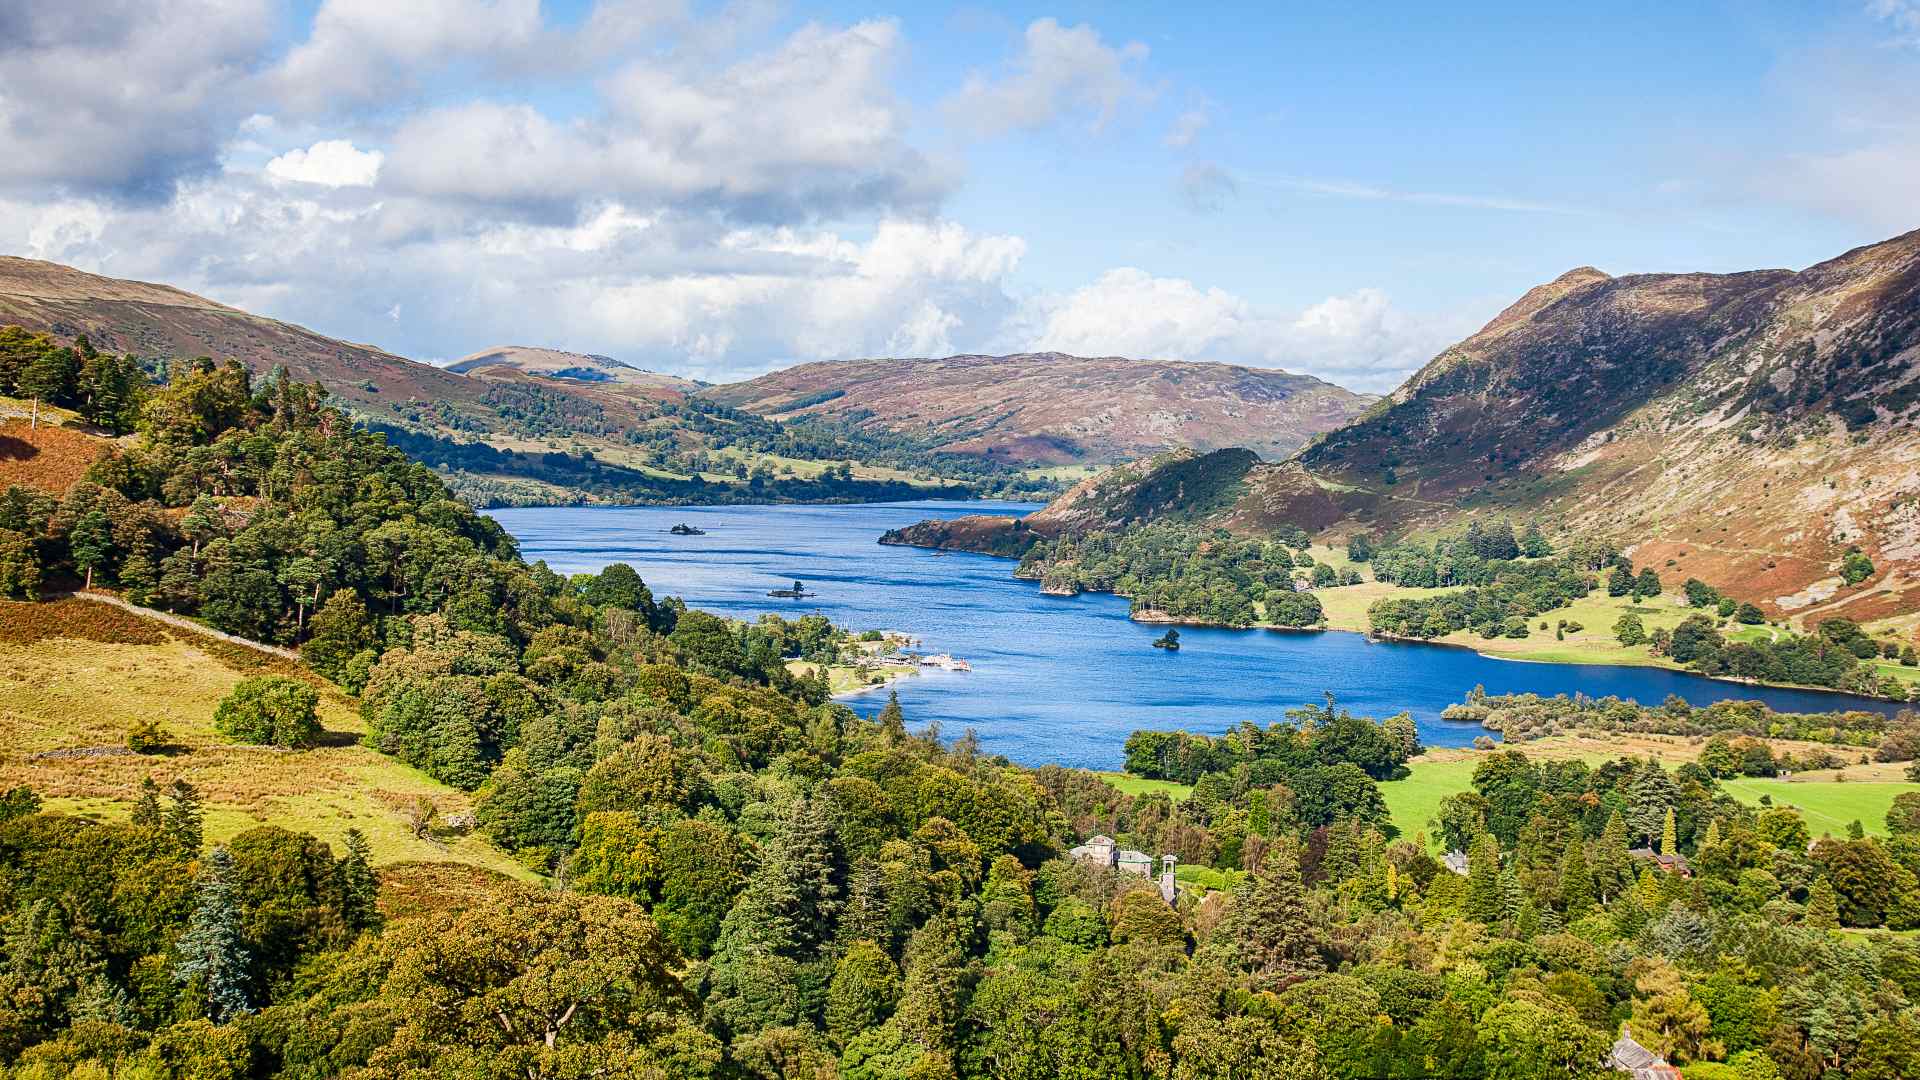 ullswater from above with green forests surroundings deep blue lake